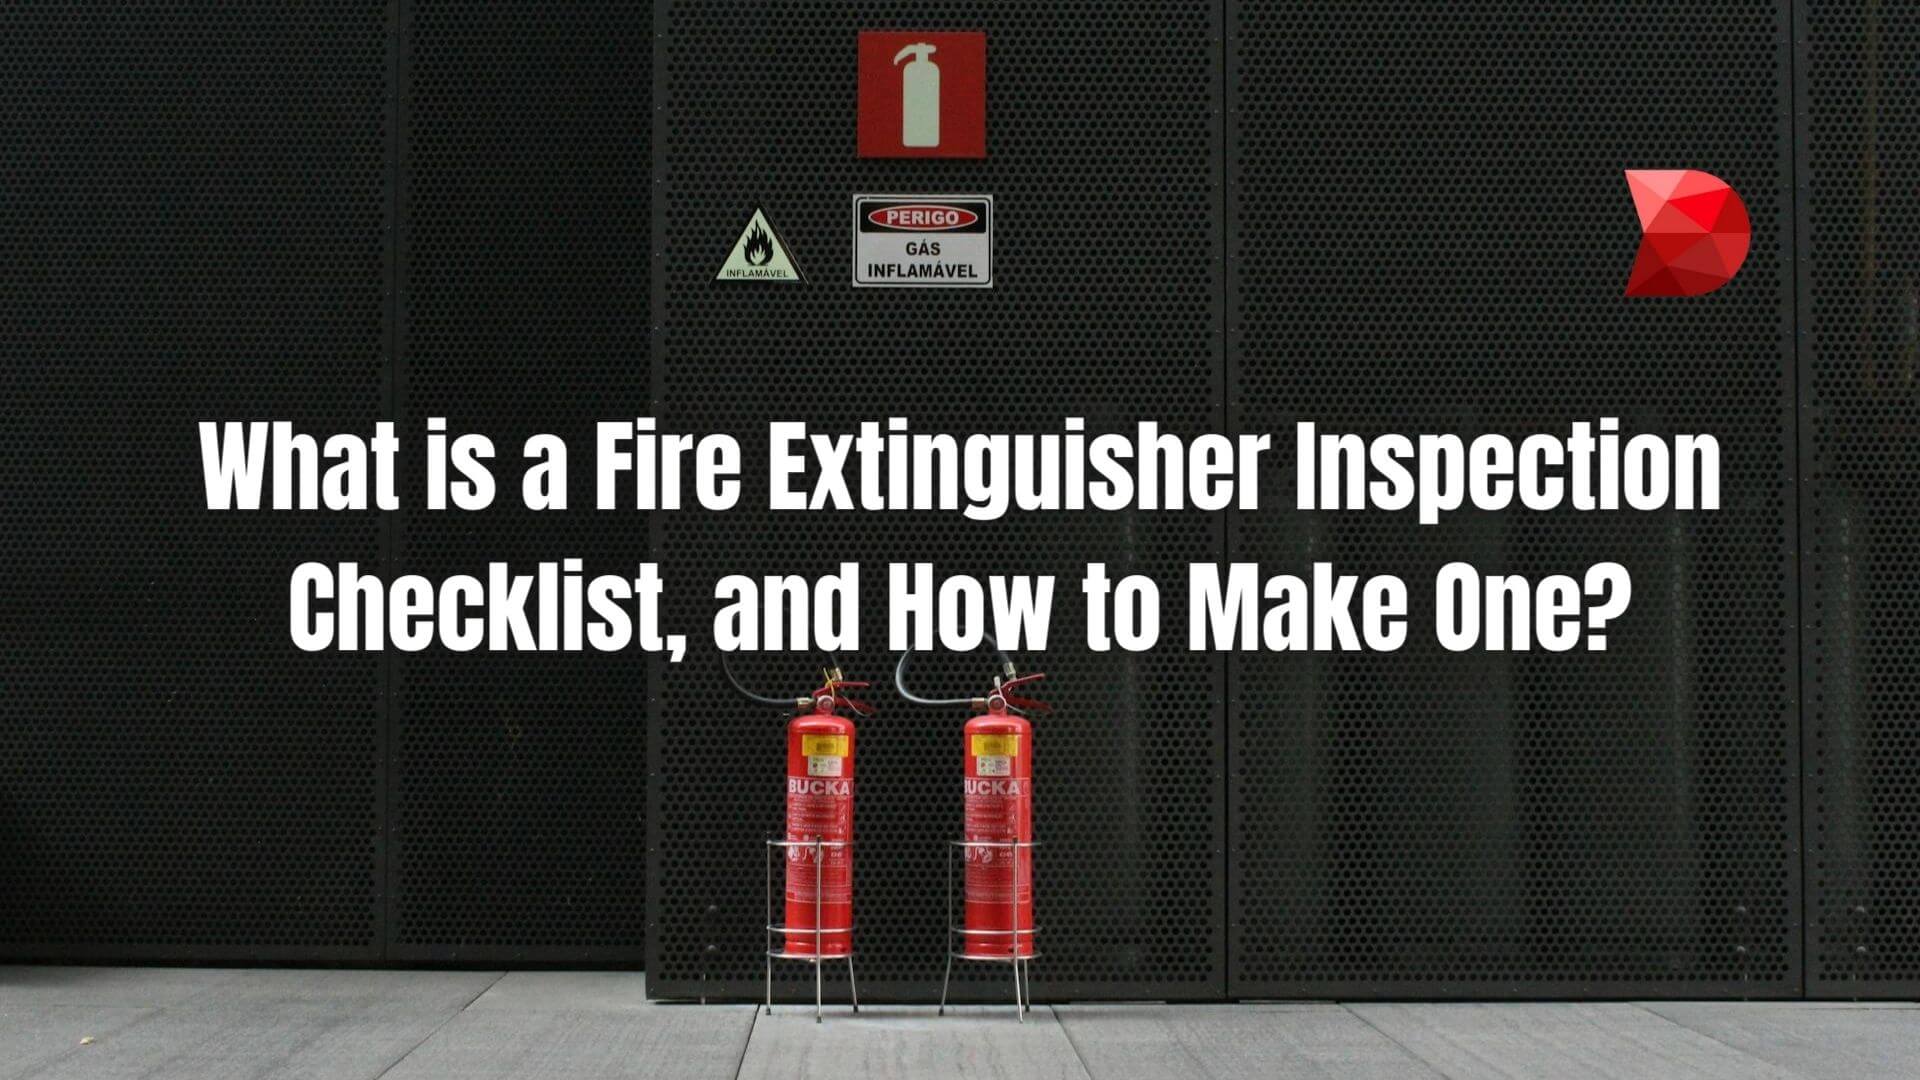 Ensure fire safety with our complete guide! Learn what to include and how to make an effective fire extinguisher inspection checklist today.